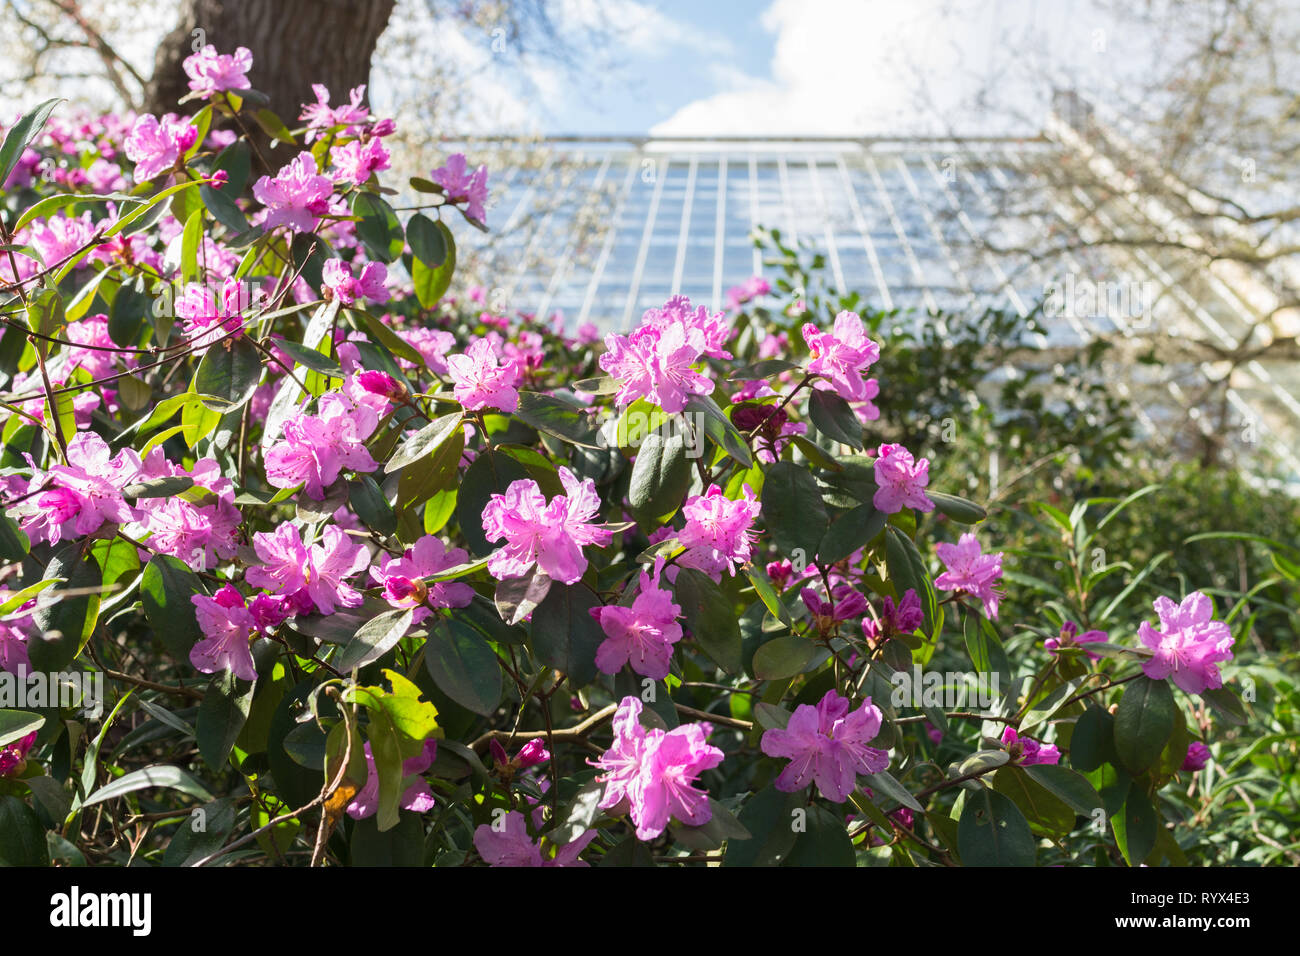 Rhododendron (carolinianum X dauricum) 'P.J. Mezitt' with pink blooms or flowers during early spring march in an English garden, UK Stock Photo